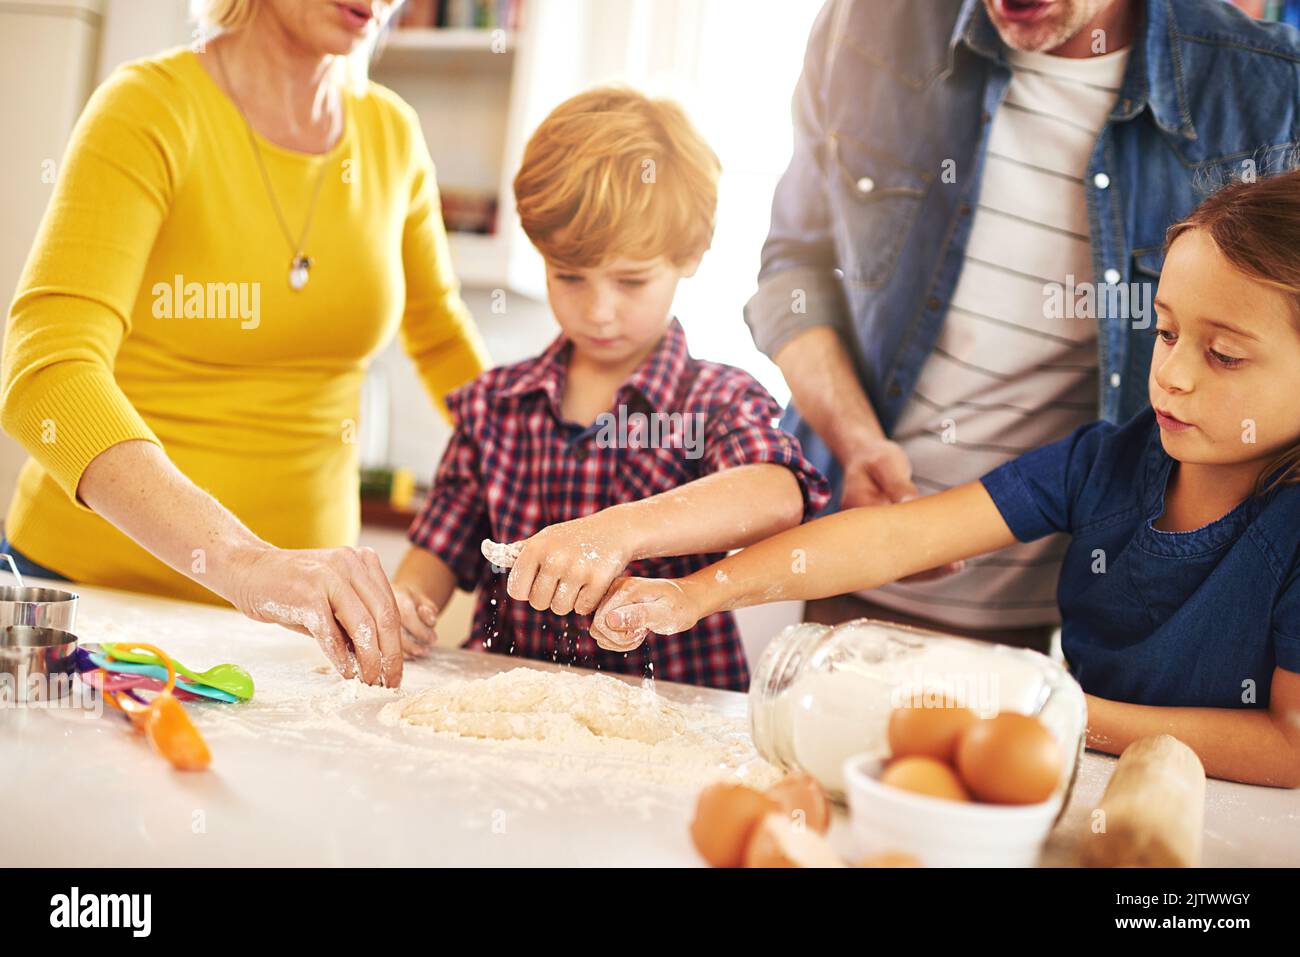 They share a love for baking. a family baking together at home. Stock Photo